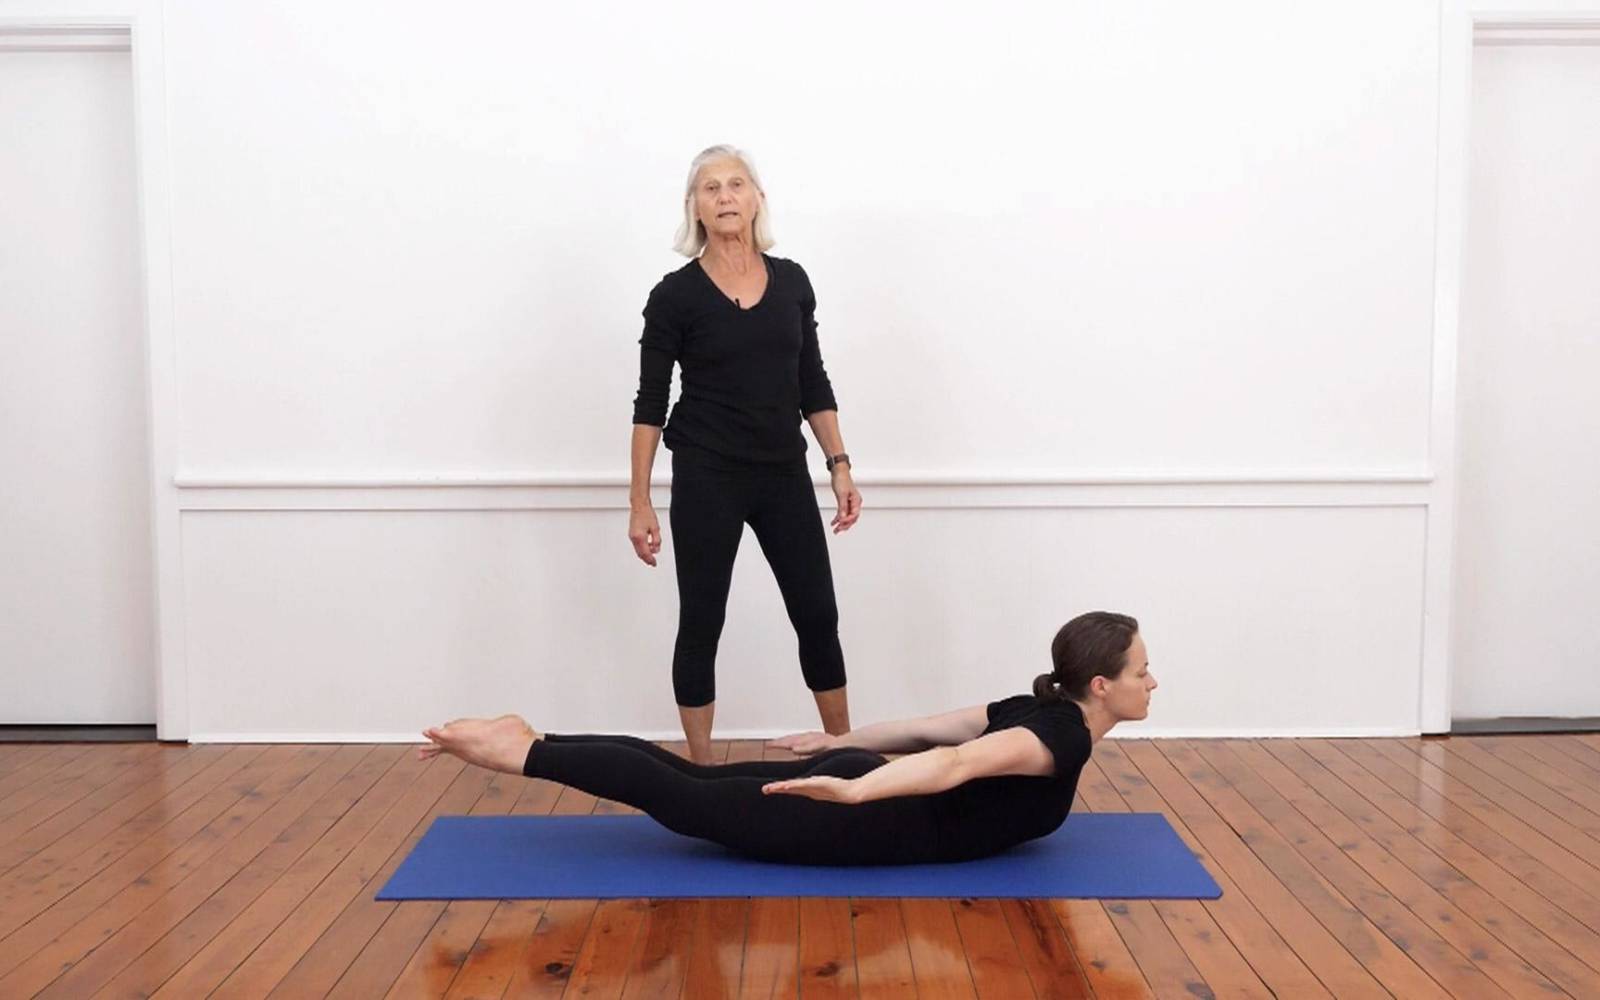 Beginner Yoga Poses - Half Locust Pose (Ardha Shalabhasana) is an easier  variation of Locust Pose especially suited to those that find the full  Locust too challenging. Ardha Shalabhasana strengthens the back,